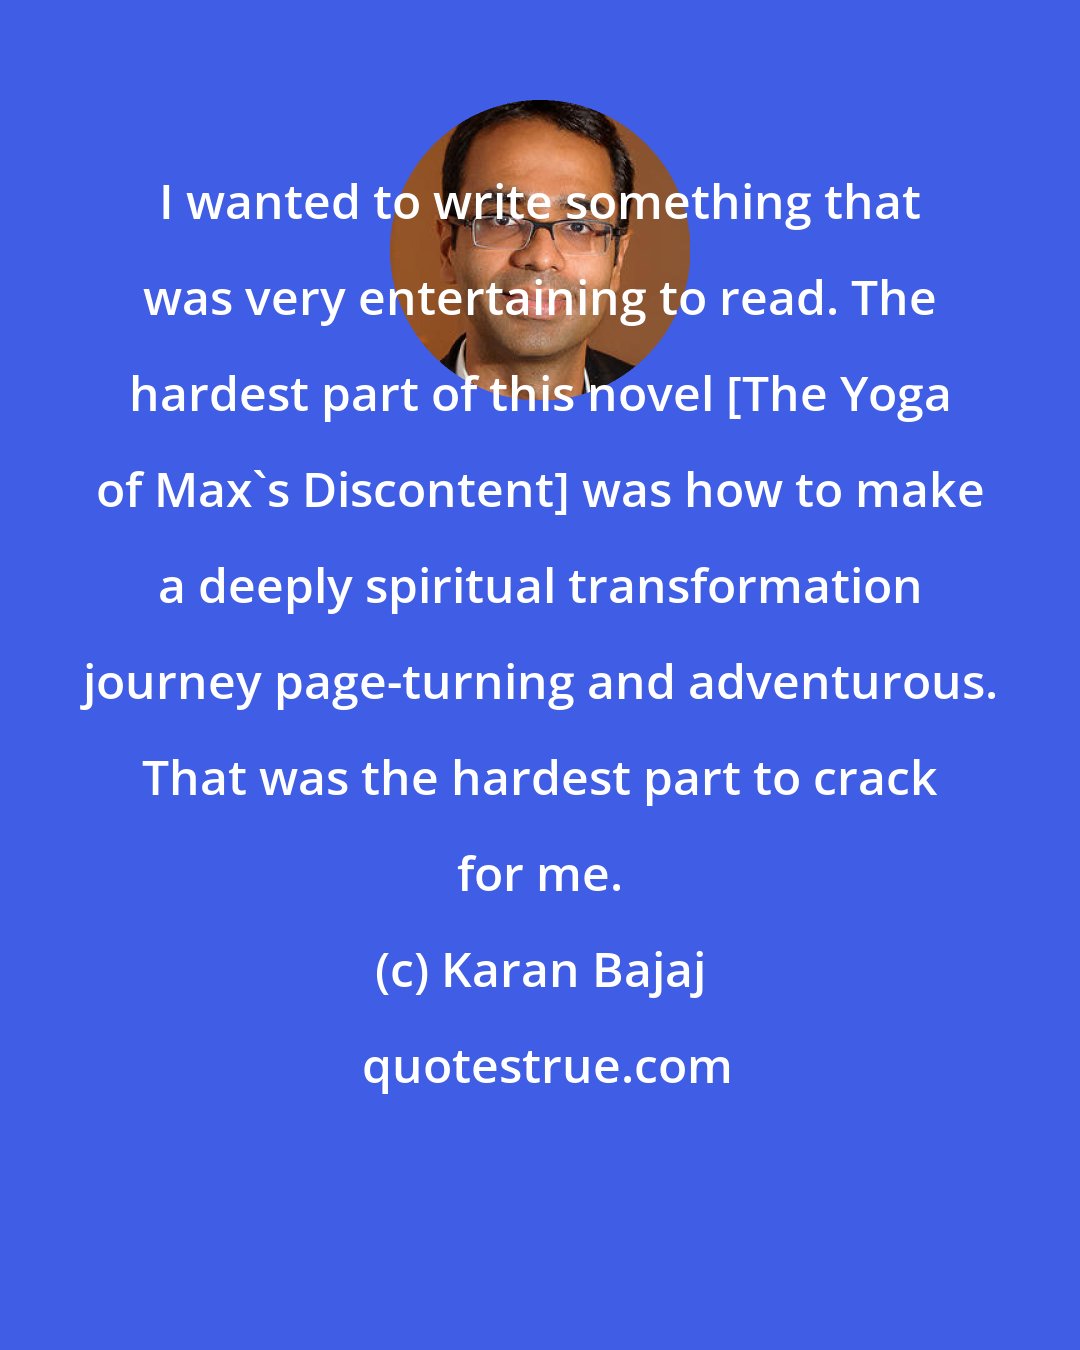 Karan Bajaj: I wanted to write something that was very entertaining to read. The hardest part of this novel [The Yoga of Max's Discontent] was how to make a deeply spiritual transformation journey page-turning and adventurous. That was the hardest part to crack for me.